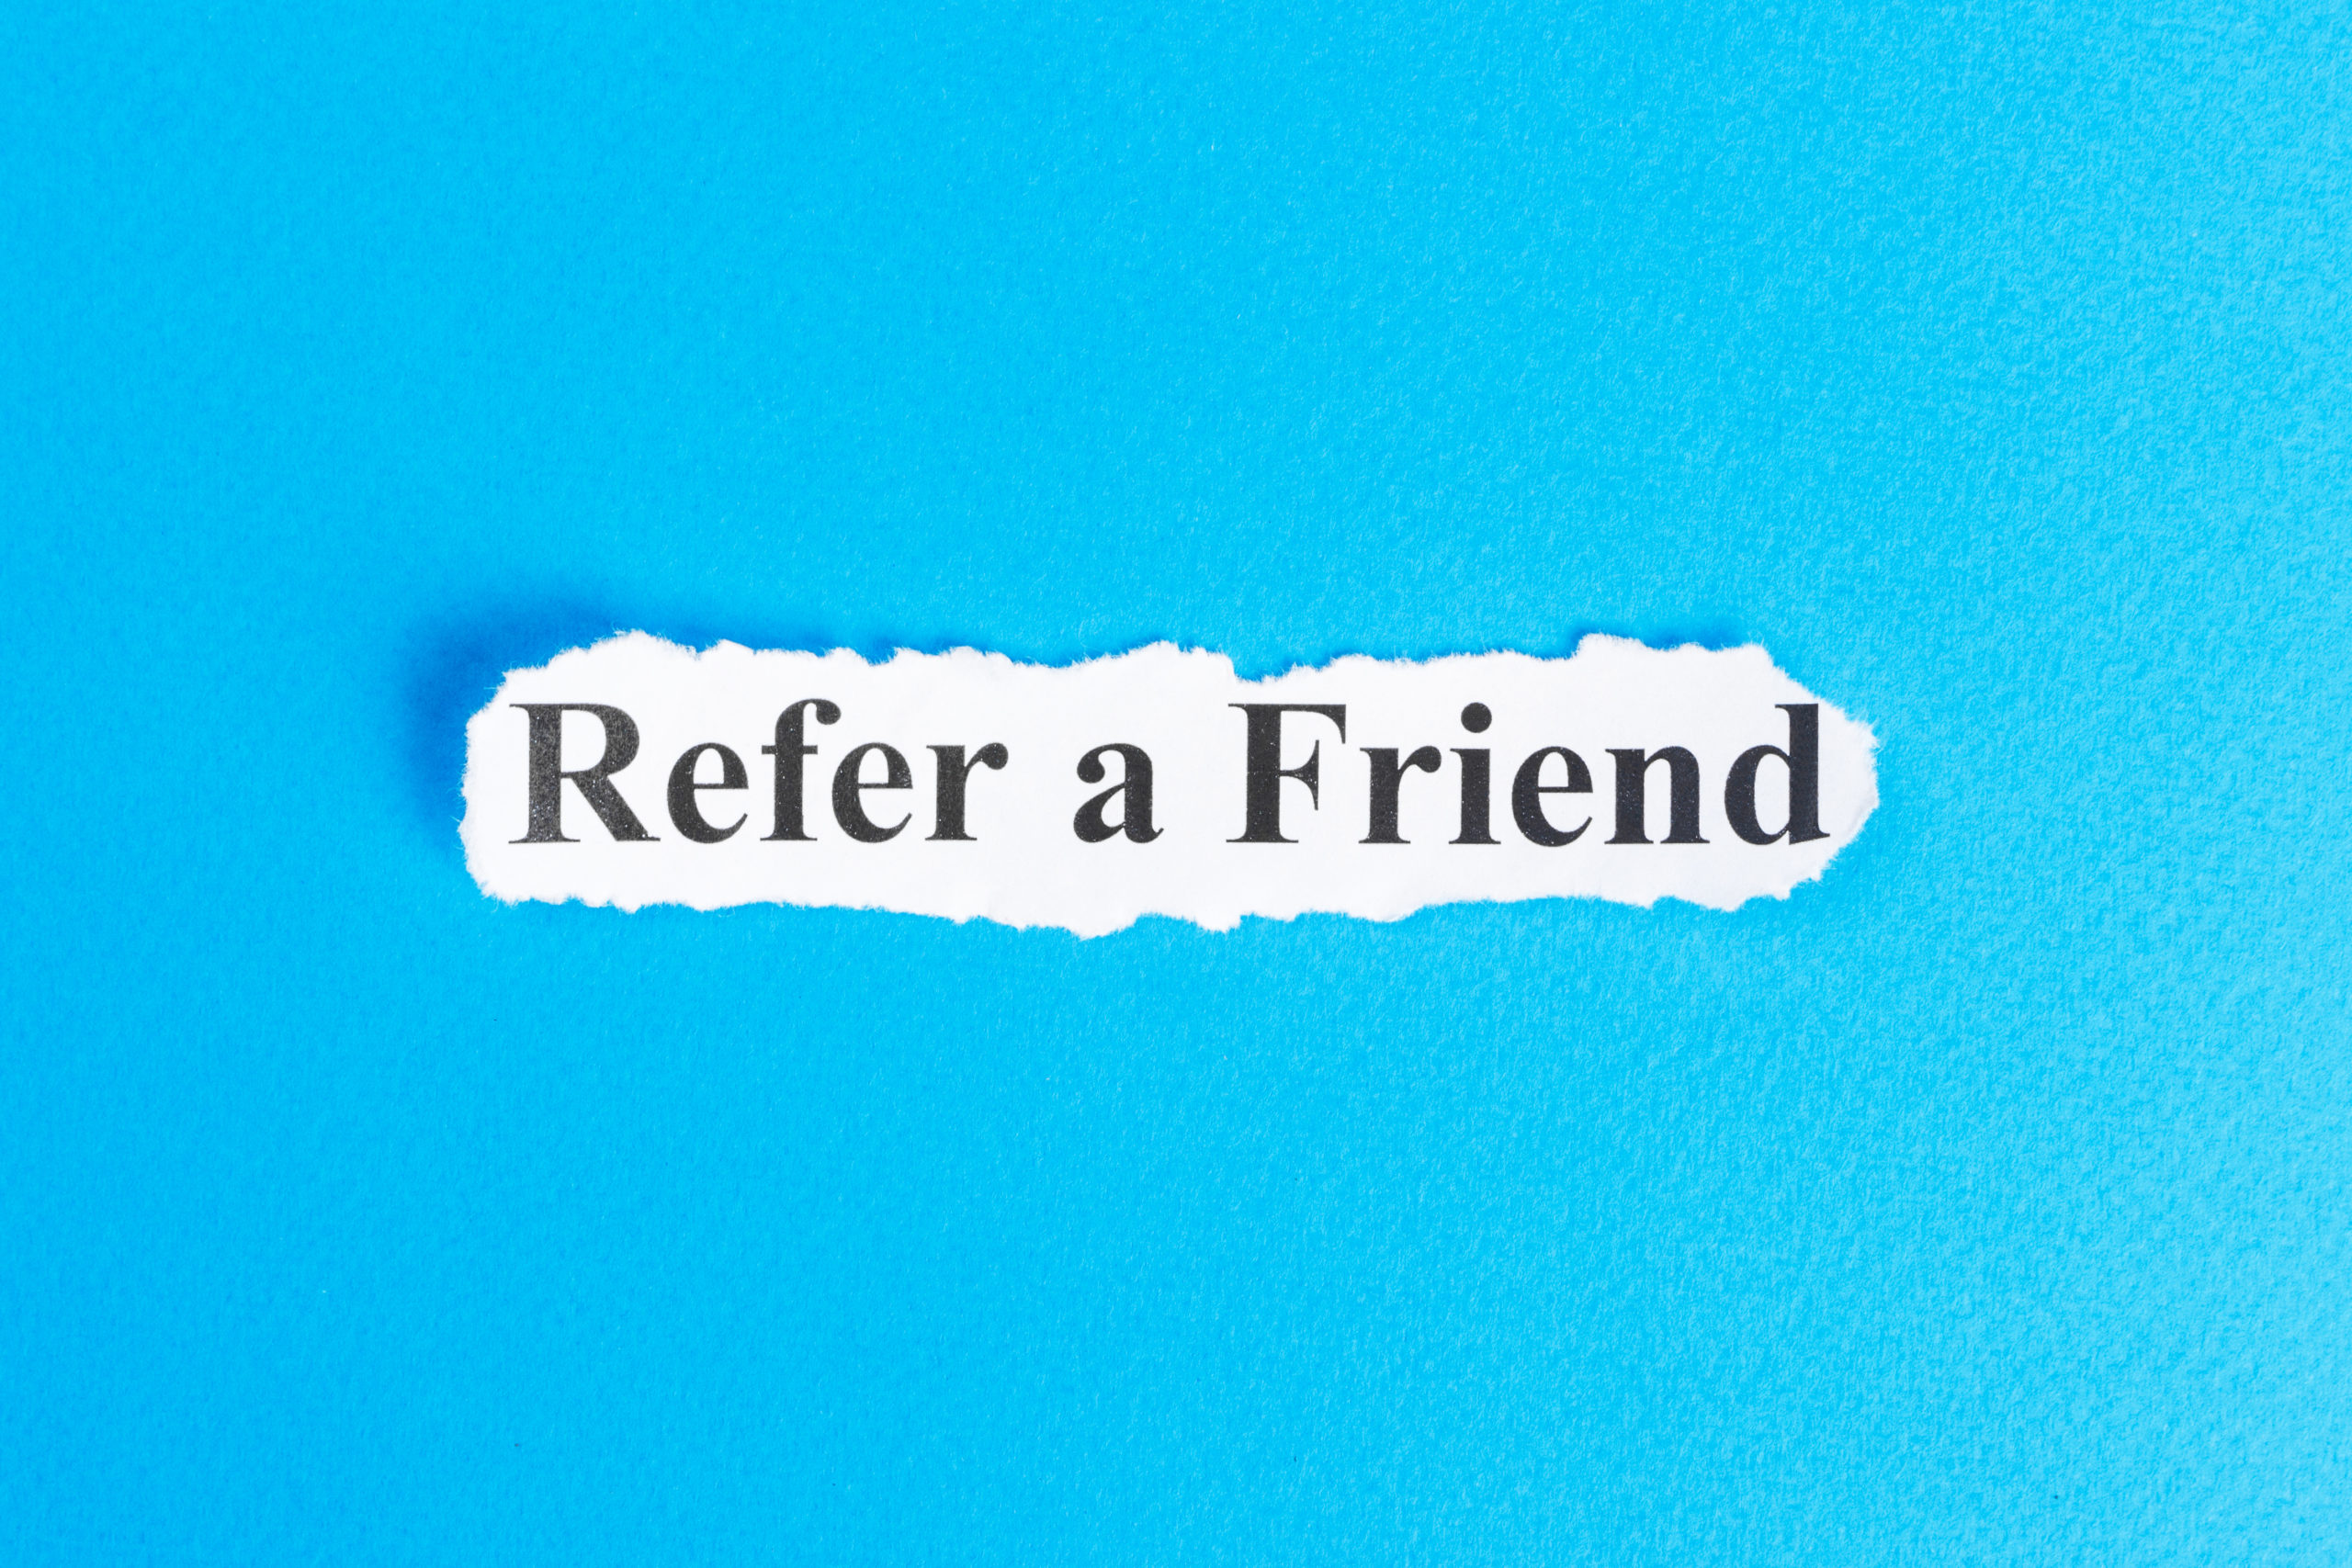 Blue background with words "refer a friend" written in text